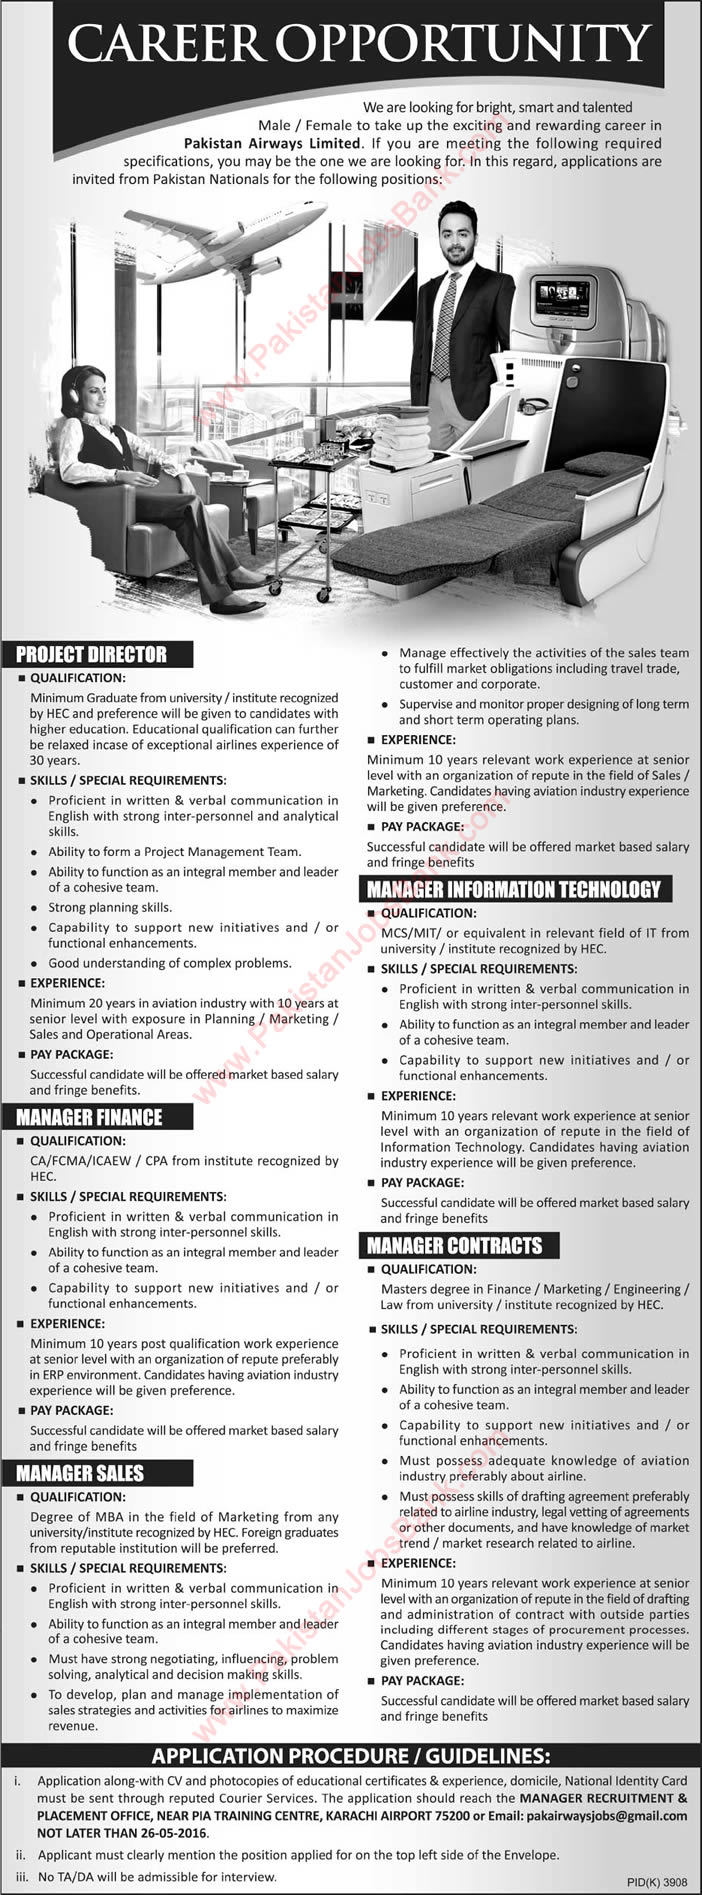 Pakistan Airways Limited Jobs May 2016 for Director & Managers Latest / New Advertisement